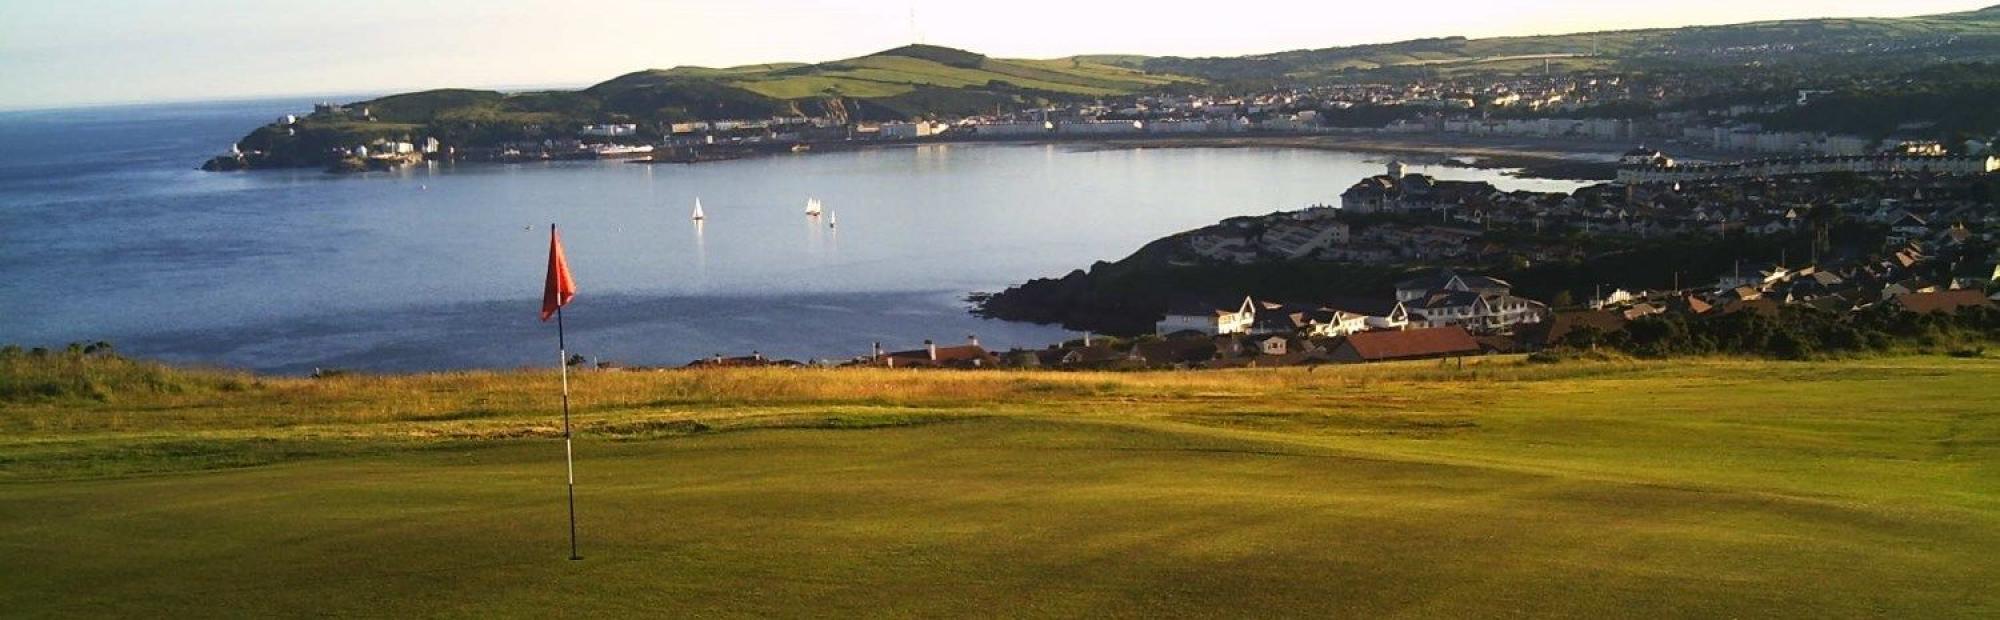 King Edward Bay Golf Club boasts several of the most popular golf course in Isle of Man